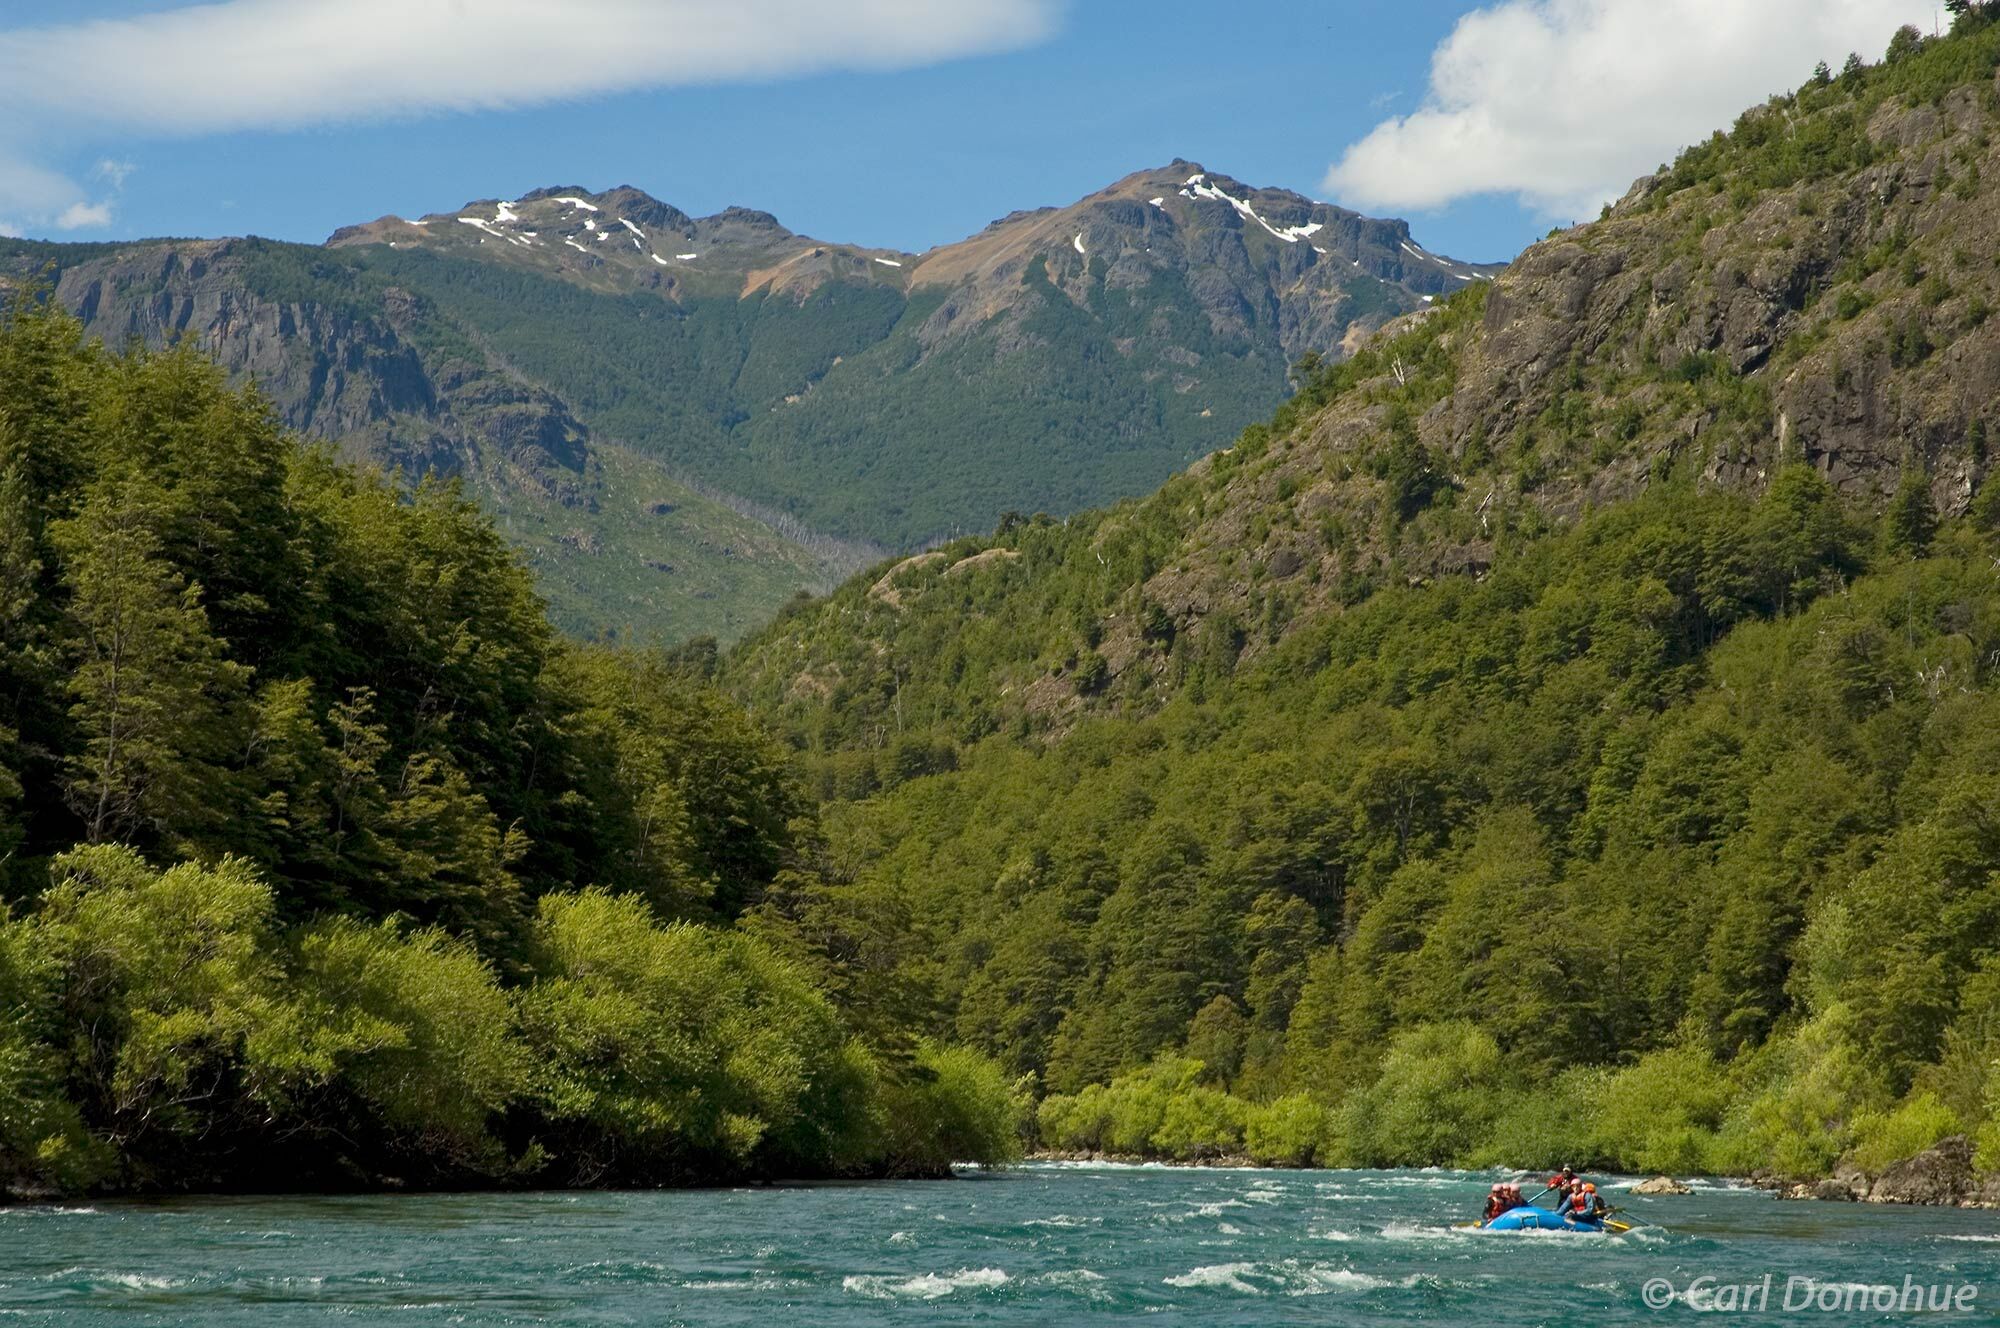 The Andes mountains tower above the Futaleufu River in Region X, Patagonia, southern Chile. The famous Puente a Puente rafting...